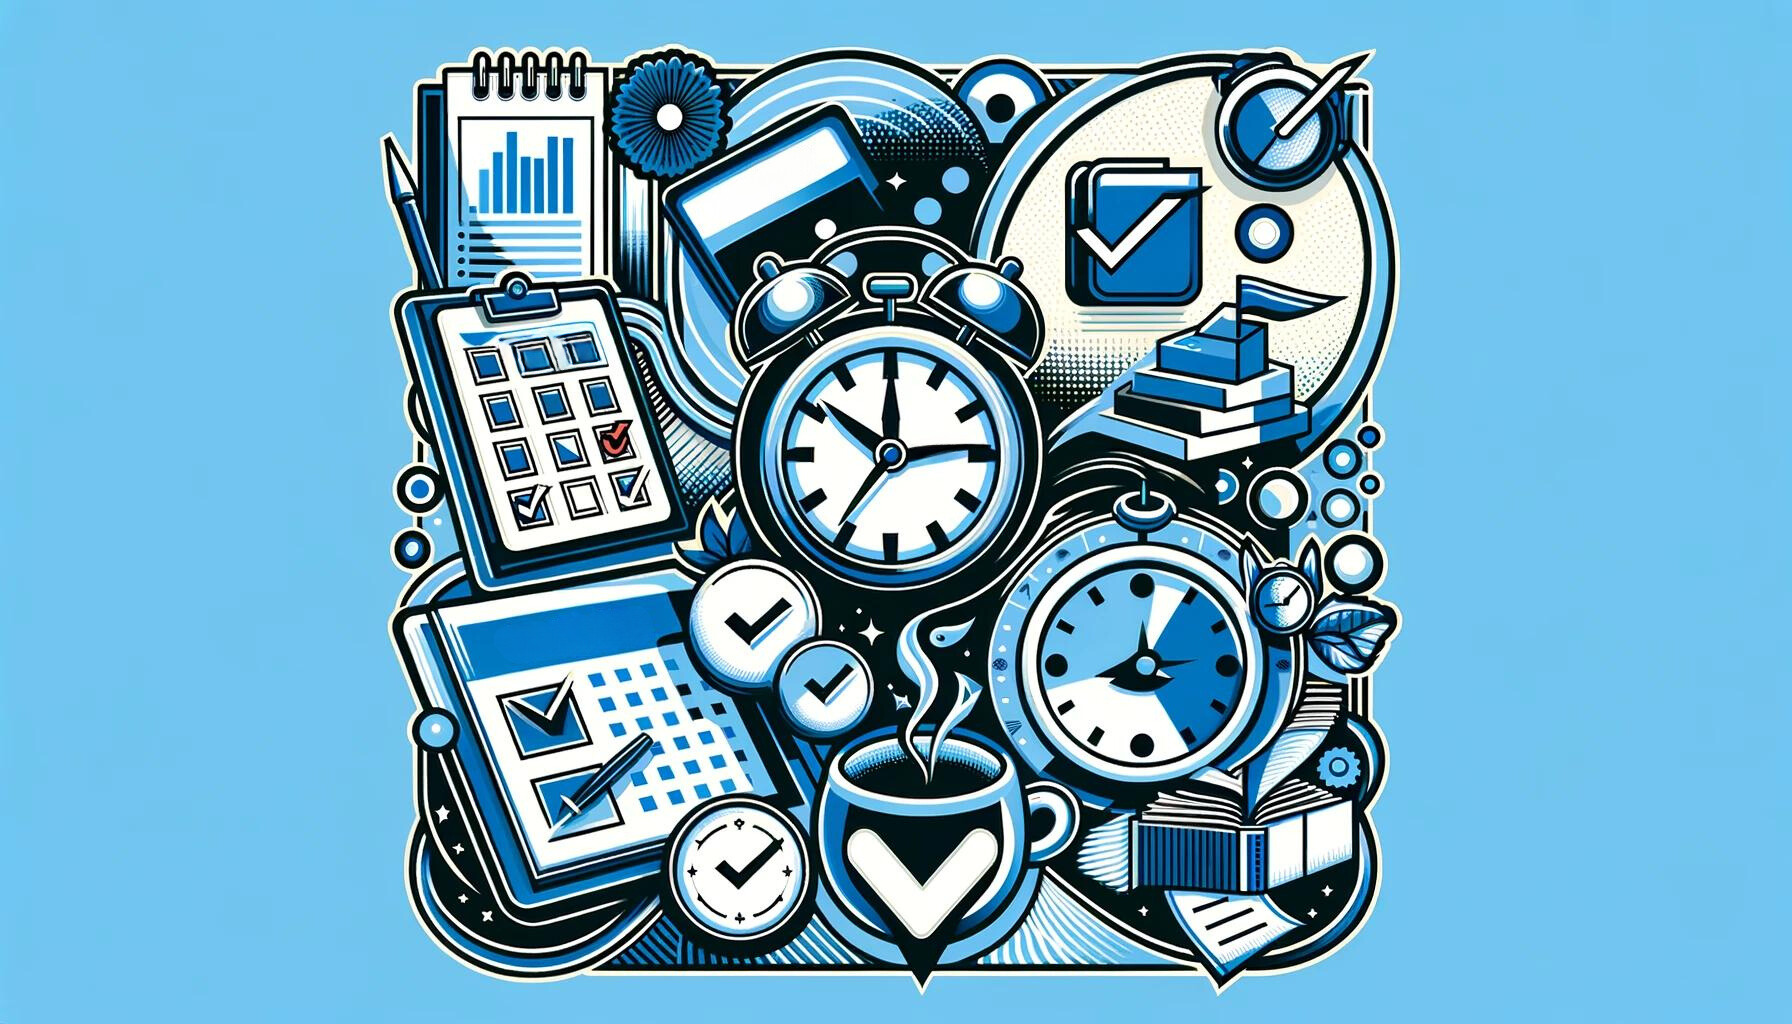 Pop art style image featuring elements of time management including a clock, calendar, and checklist, in blue, white, and grey colours, representing the 4 D's of time management: Do, Delegate, Defer, Delete.